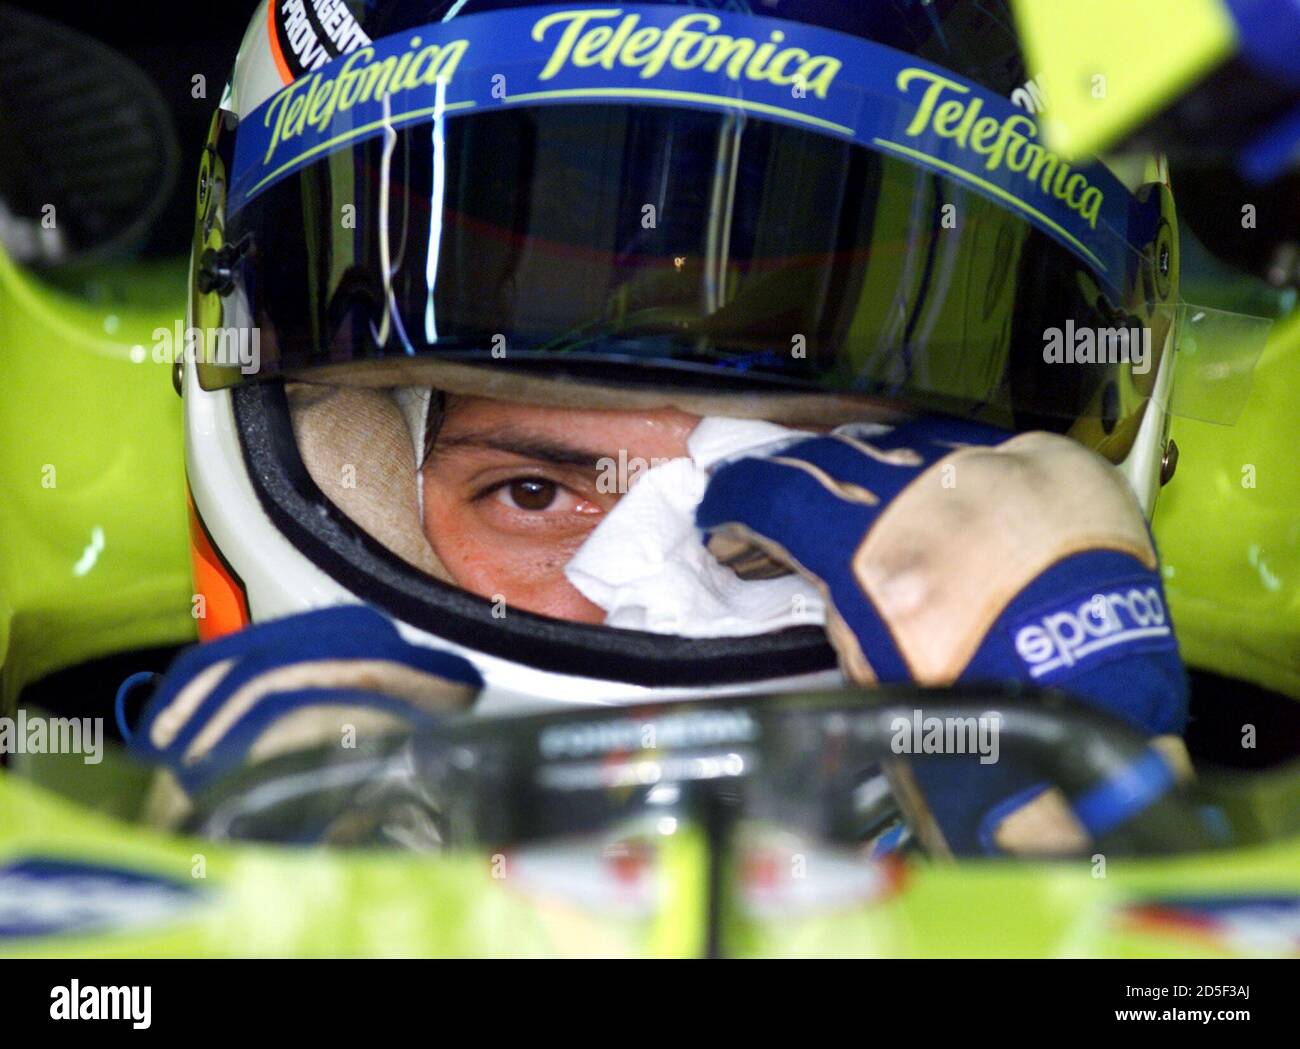 Argentine Racing Car Driver High Resolution Stock Photography and Images -  Alamy